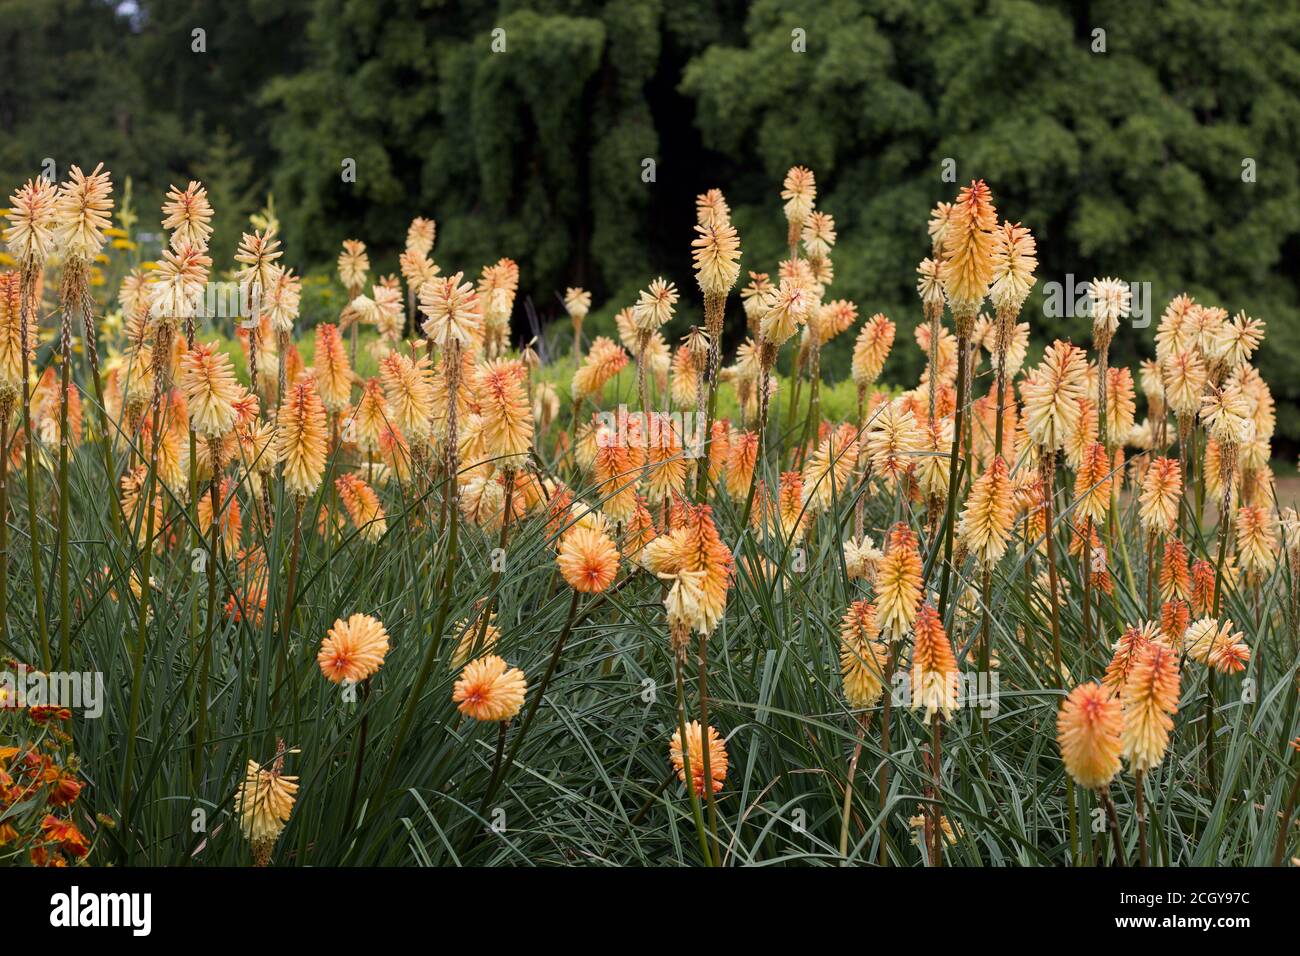 Flowerbed of pale orange red hot pokers or kniphofia in garden Stock Photo